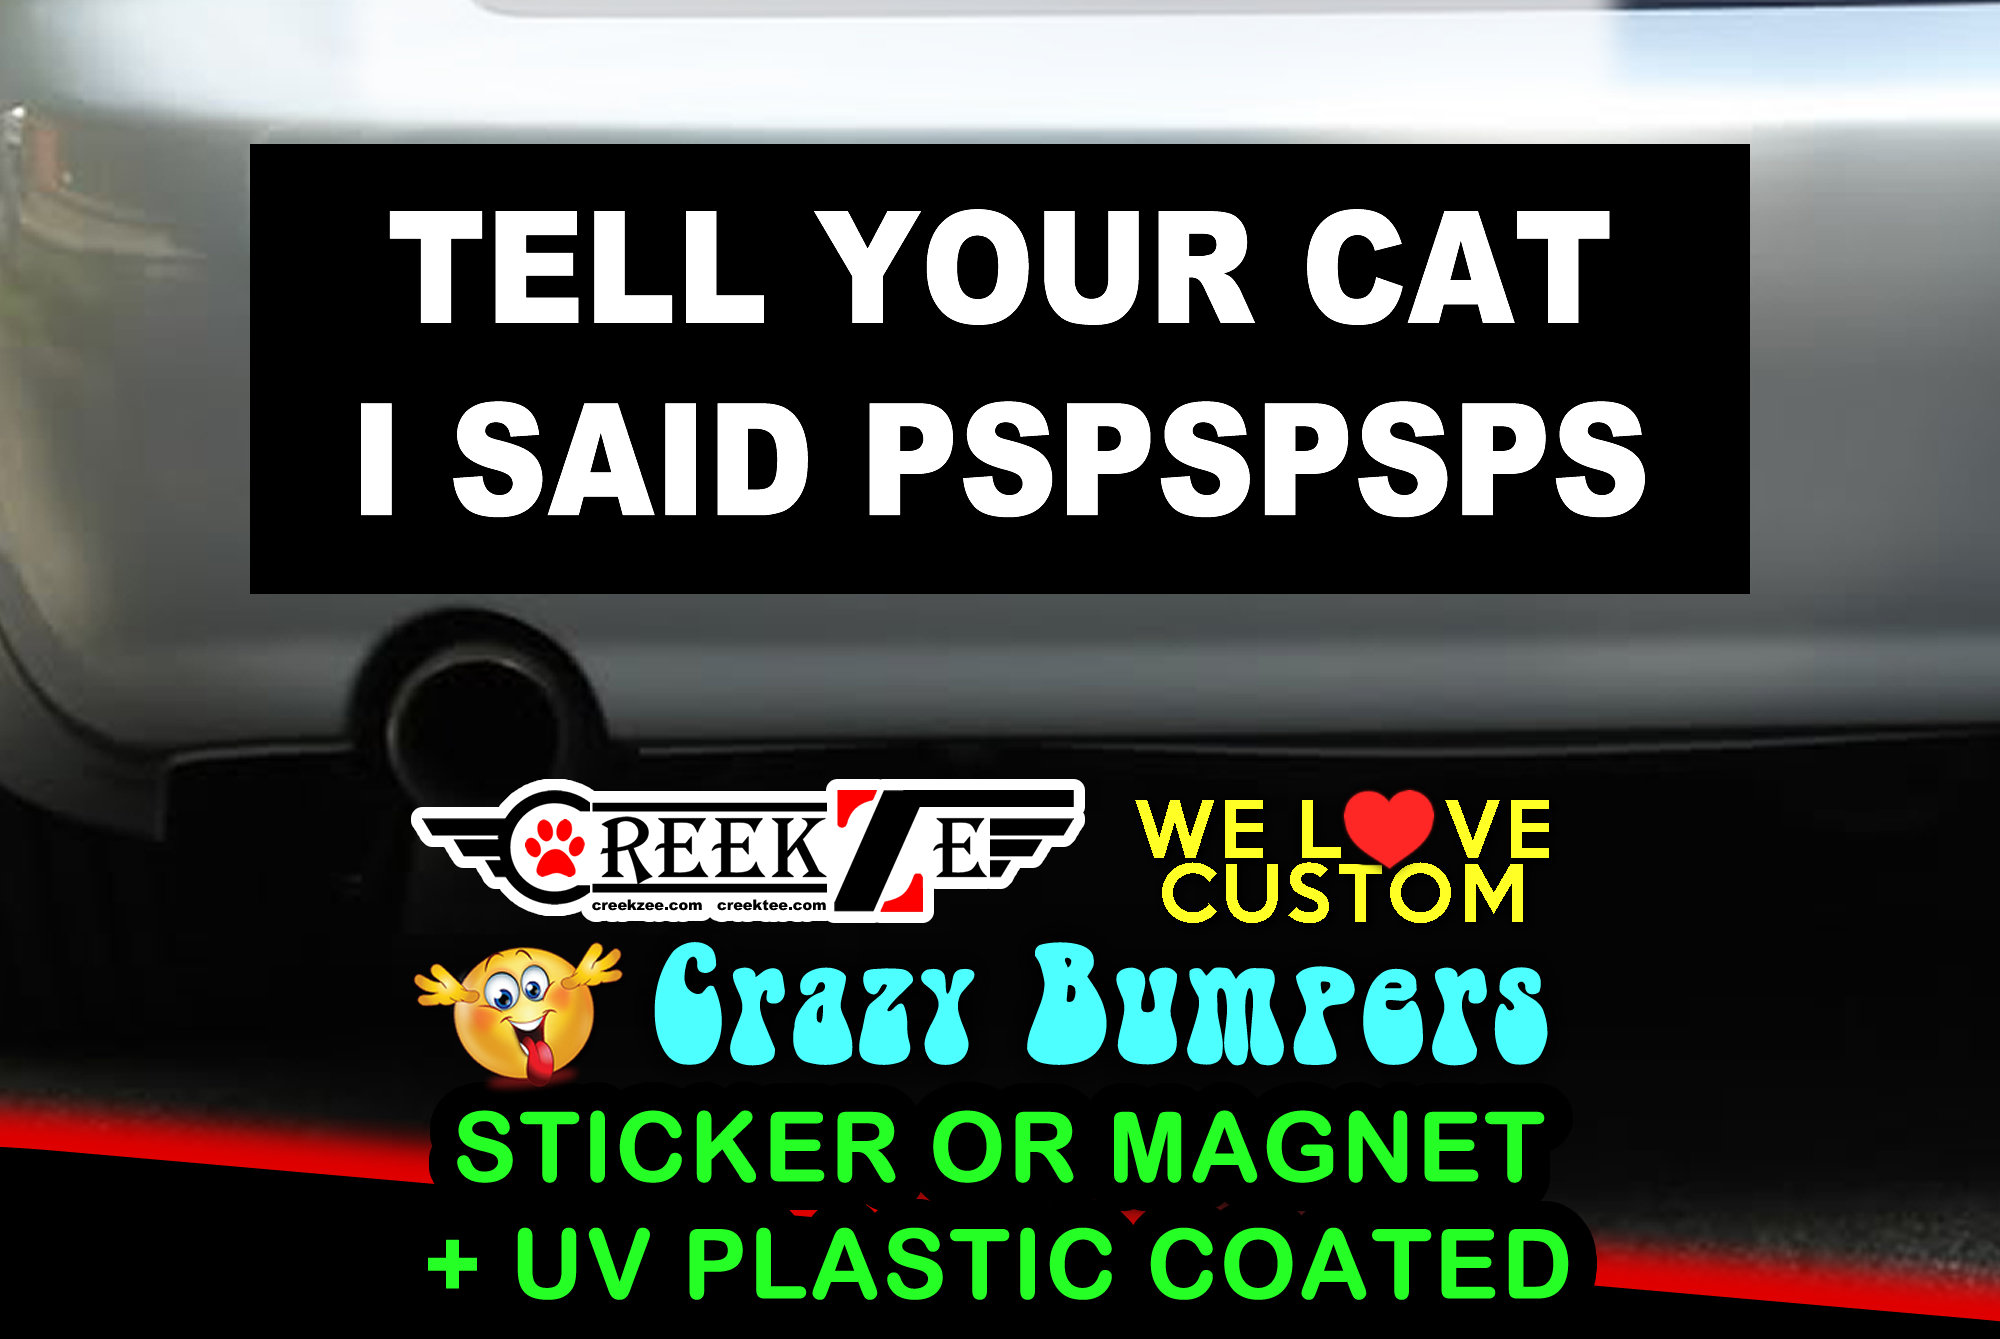 Tell your cat i said pspspsps Funny Bumper Sticker or Magnet sizes 4